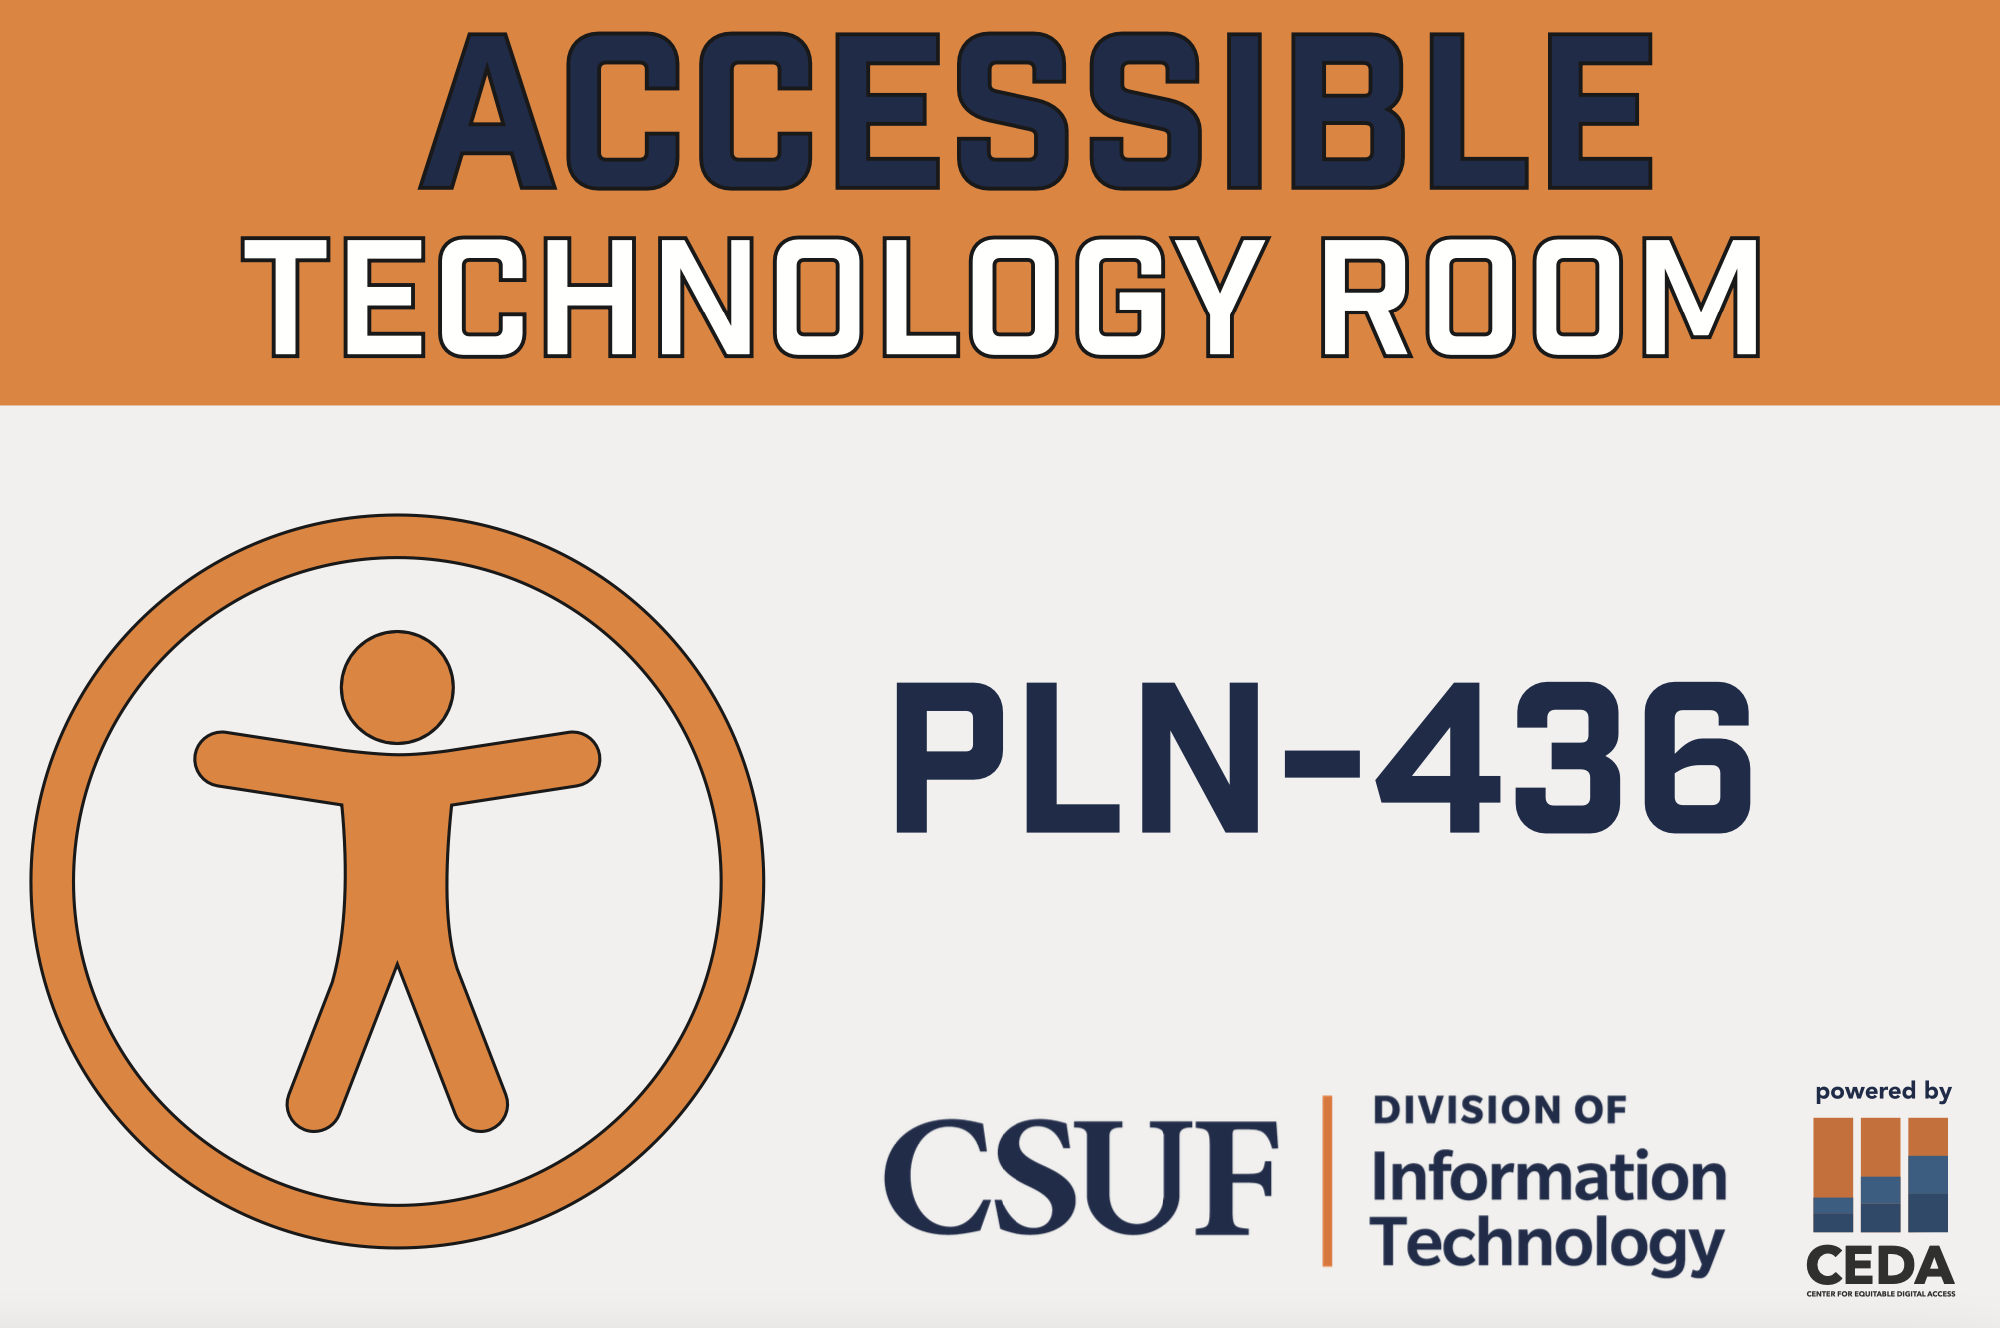 Accessible Technology Room, PLN-436, CSUF Division of IT, Powered by CEDA